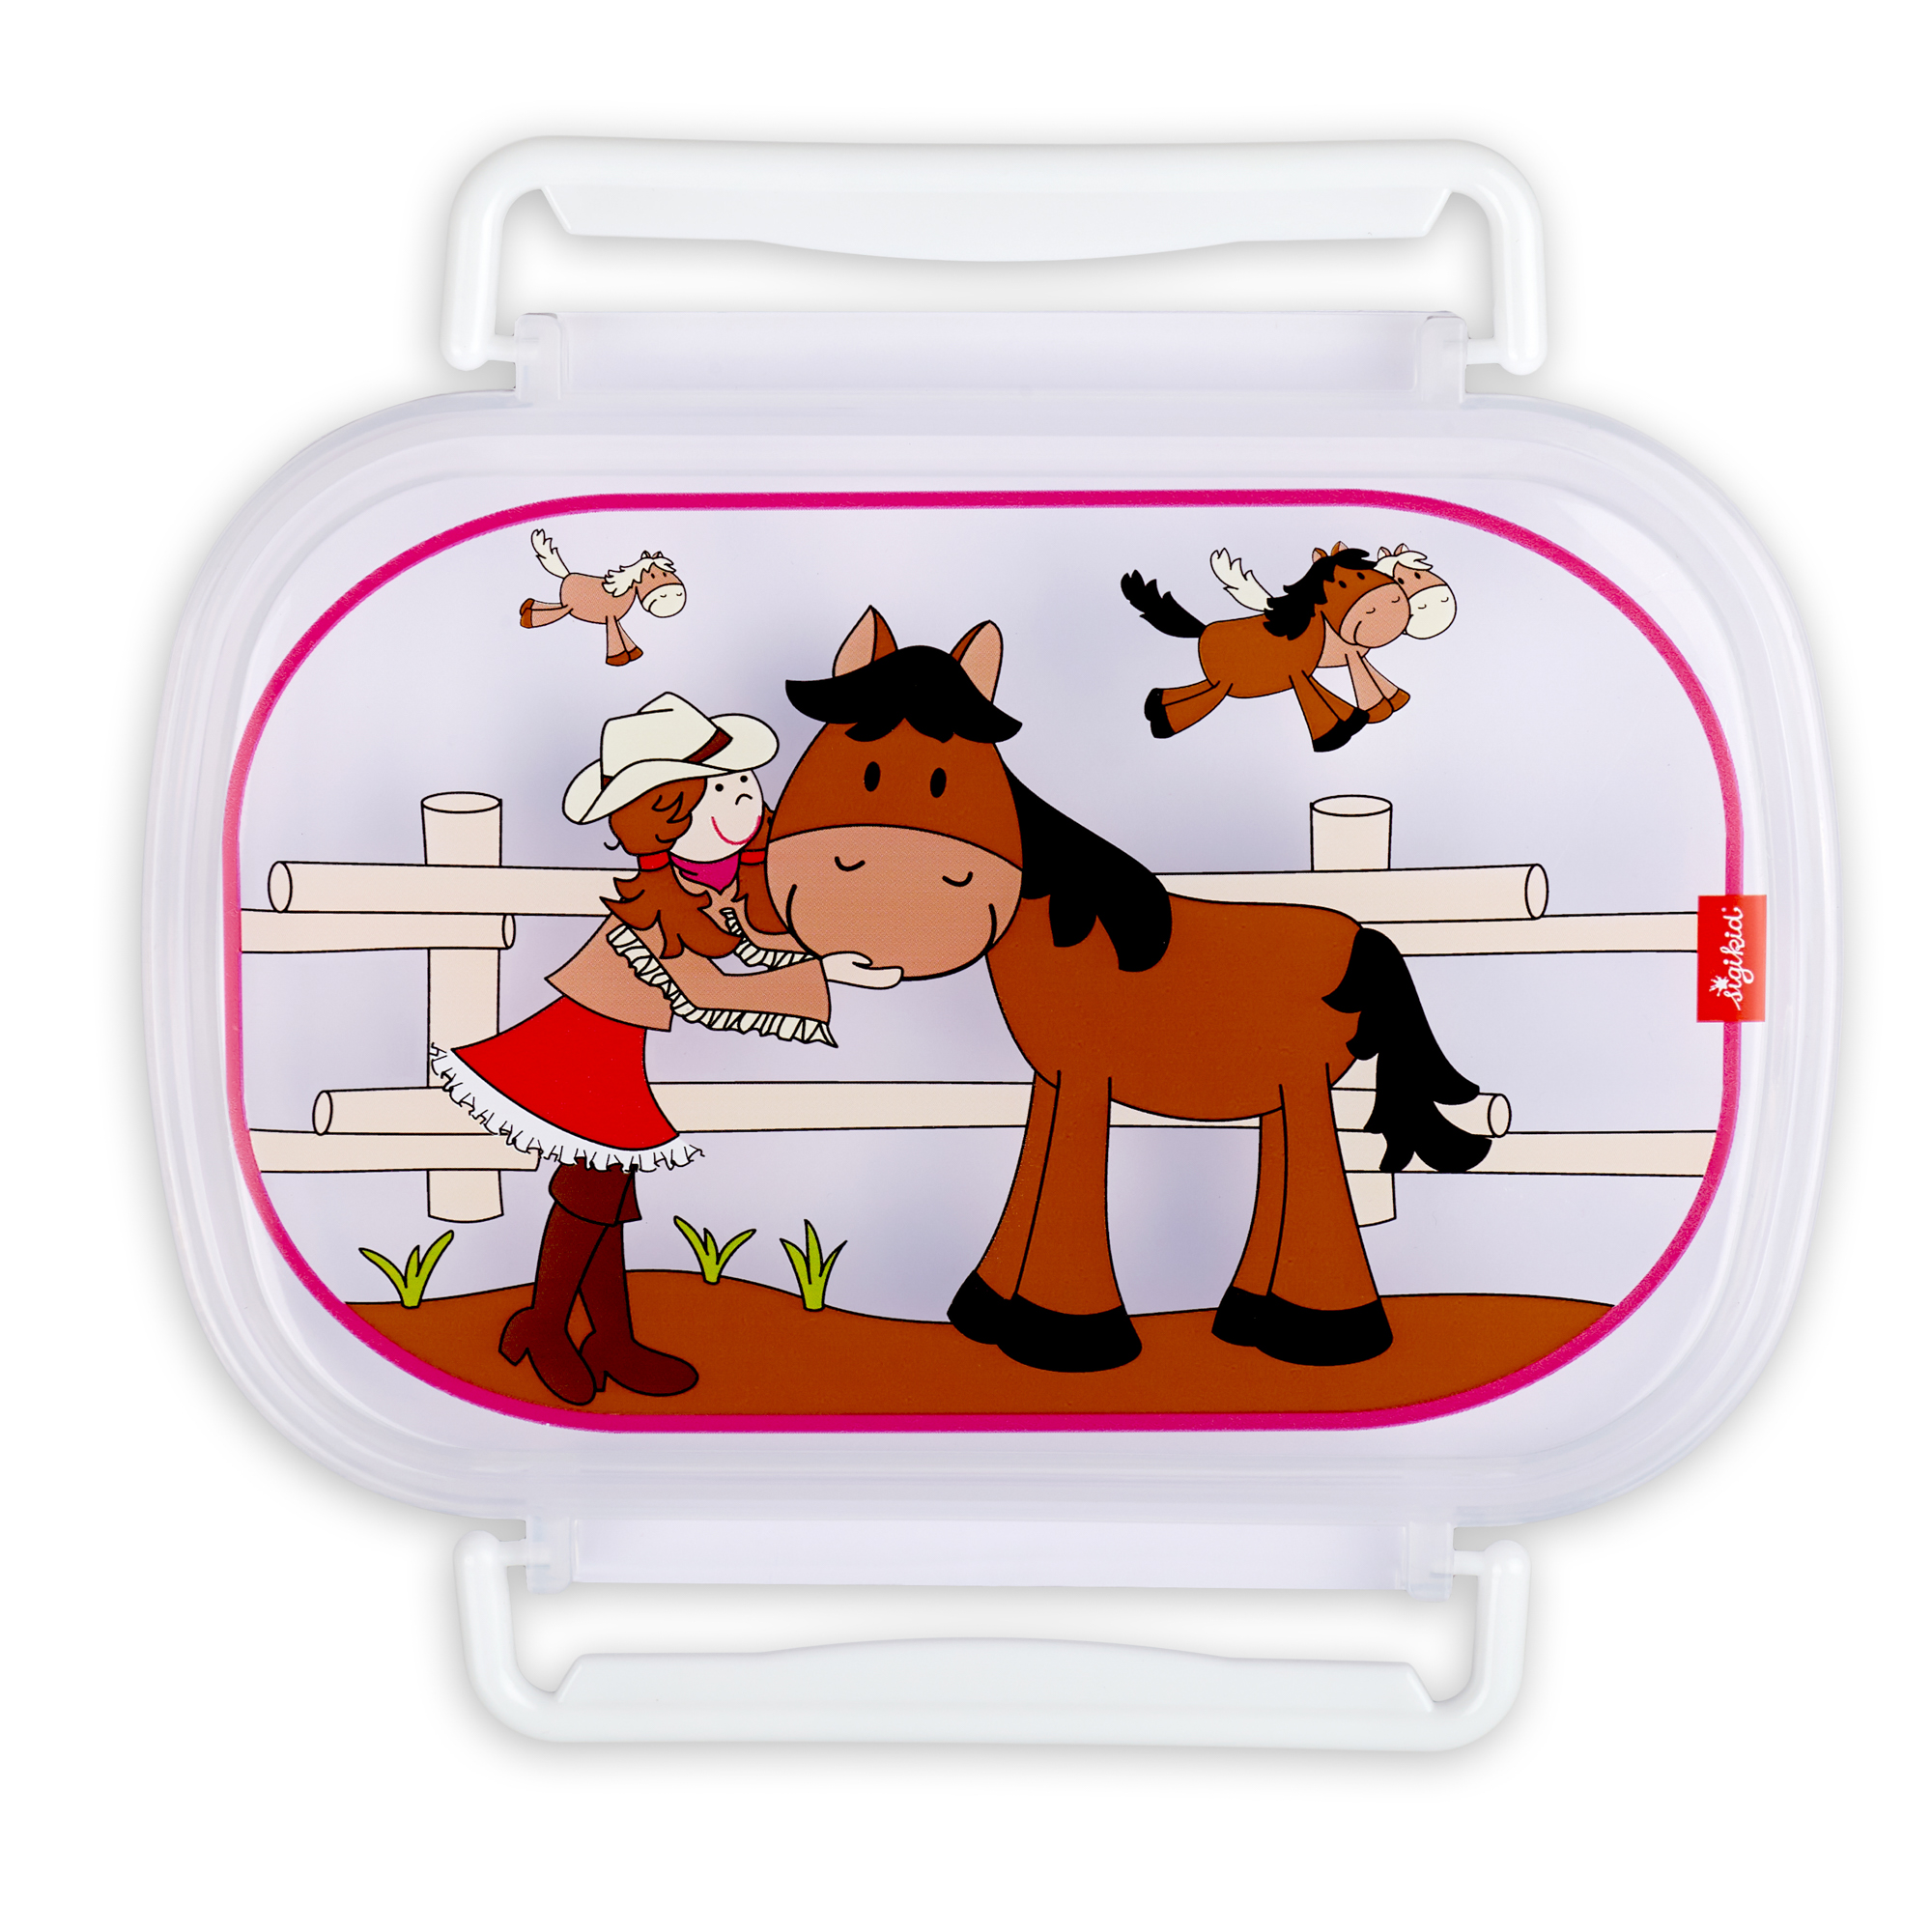 Lunch box lid replacement, Pony Sue